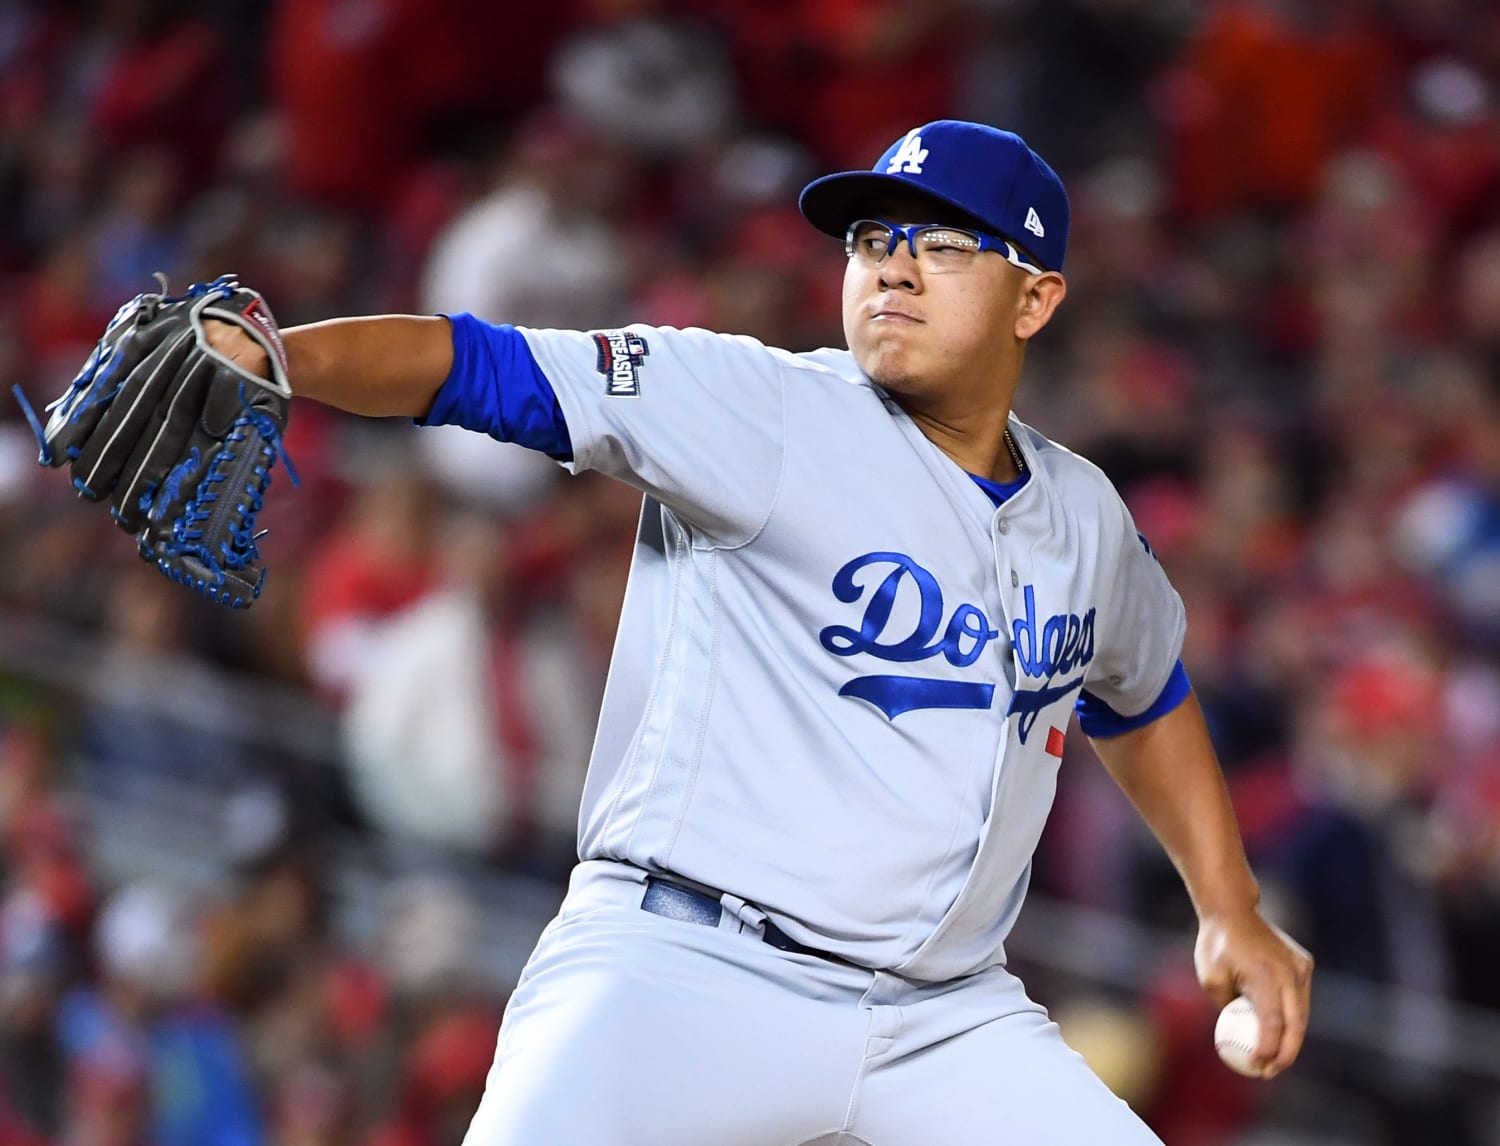 MLB News: Julio Urias leads Mexico's MLB star studded roster that